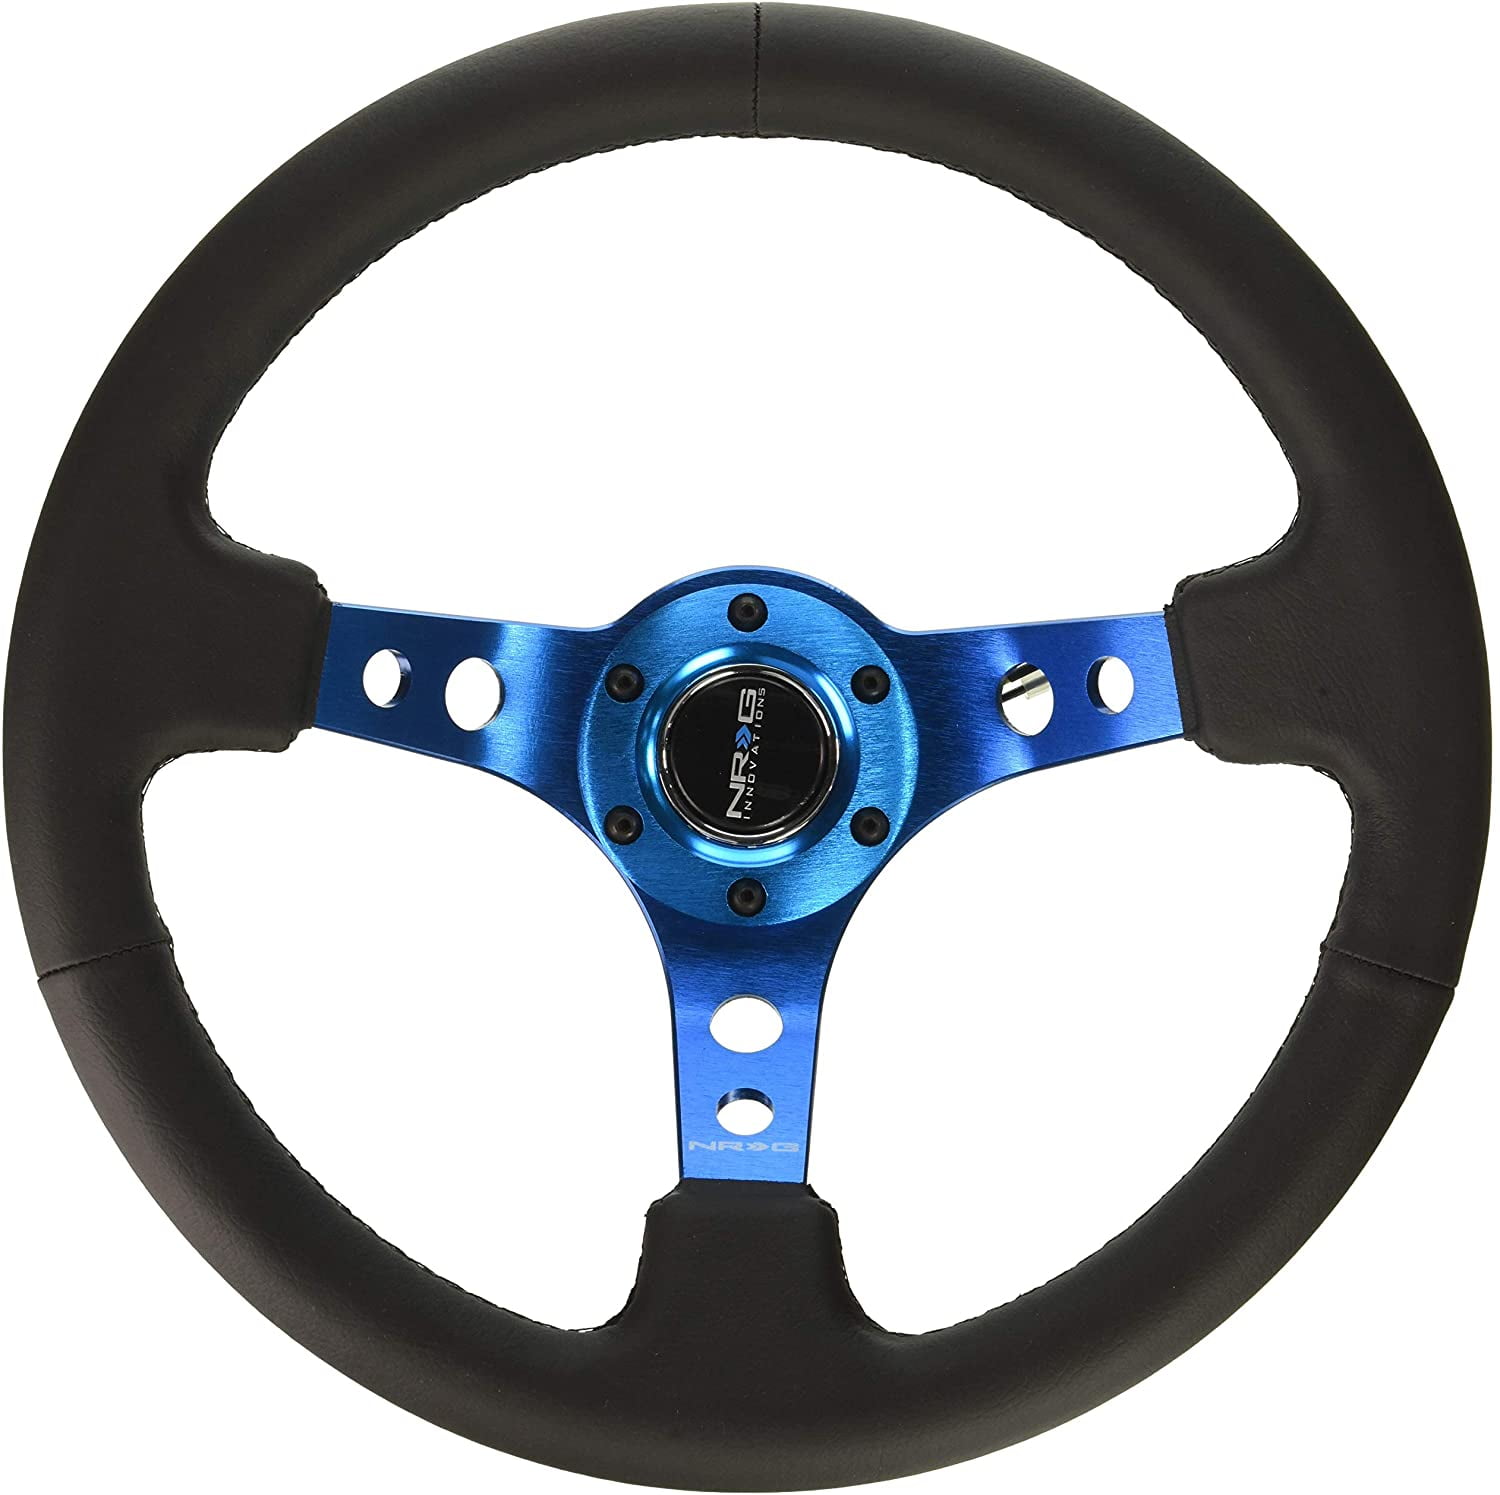 3 Deep NRG Innovations RST-006RR-BS-B Reinforced Wheel-350mm Sport Steering Wheel Spoke with Suede Finish and Black Stitch